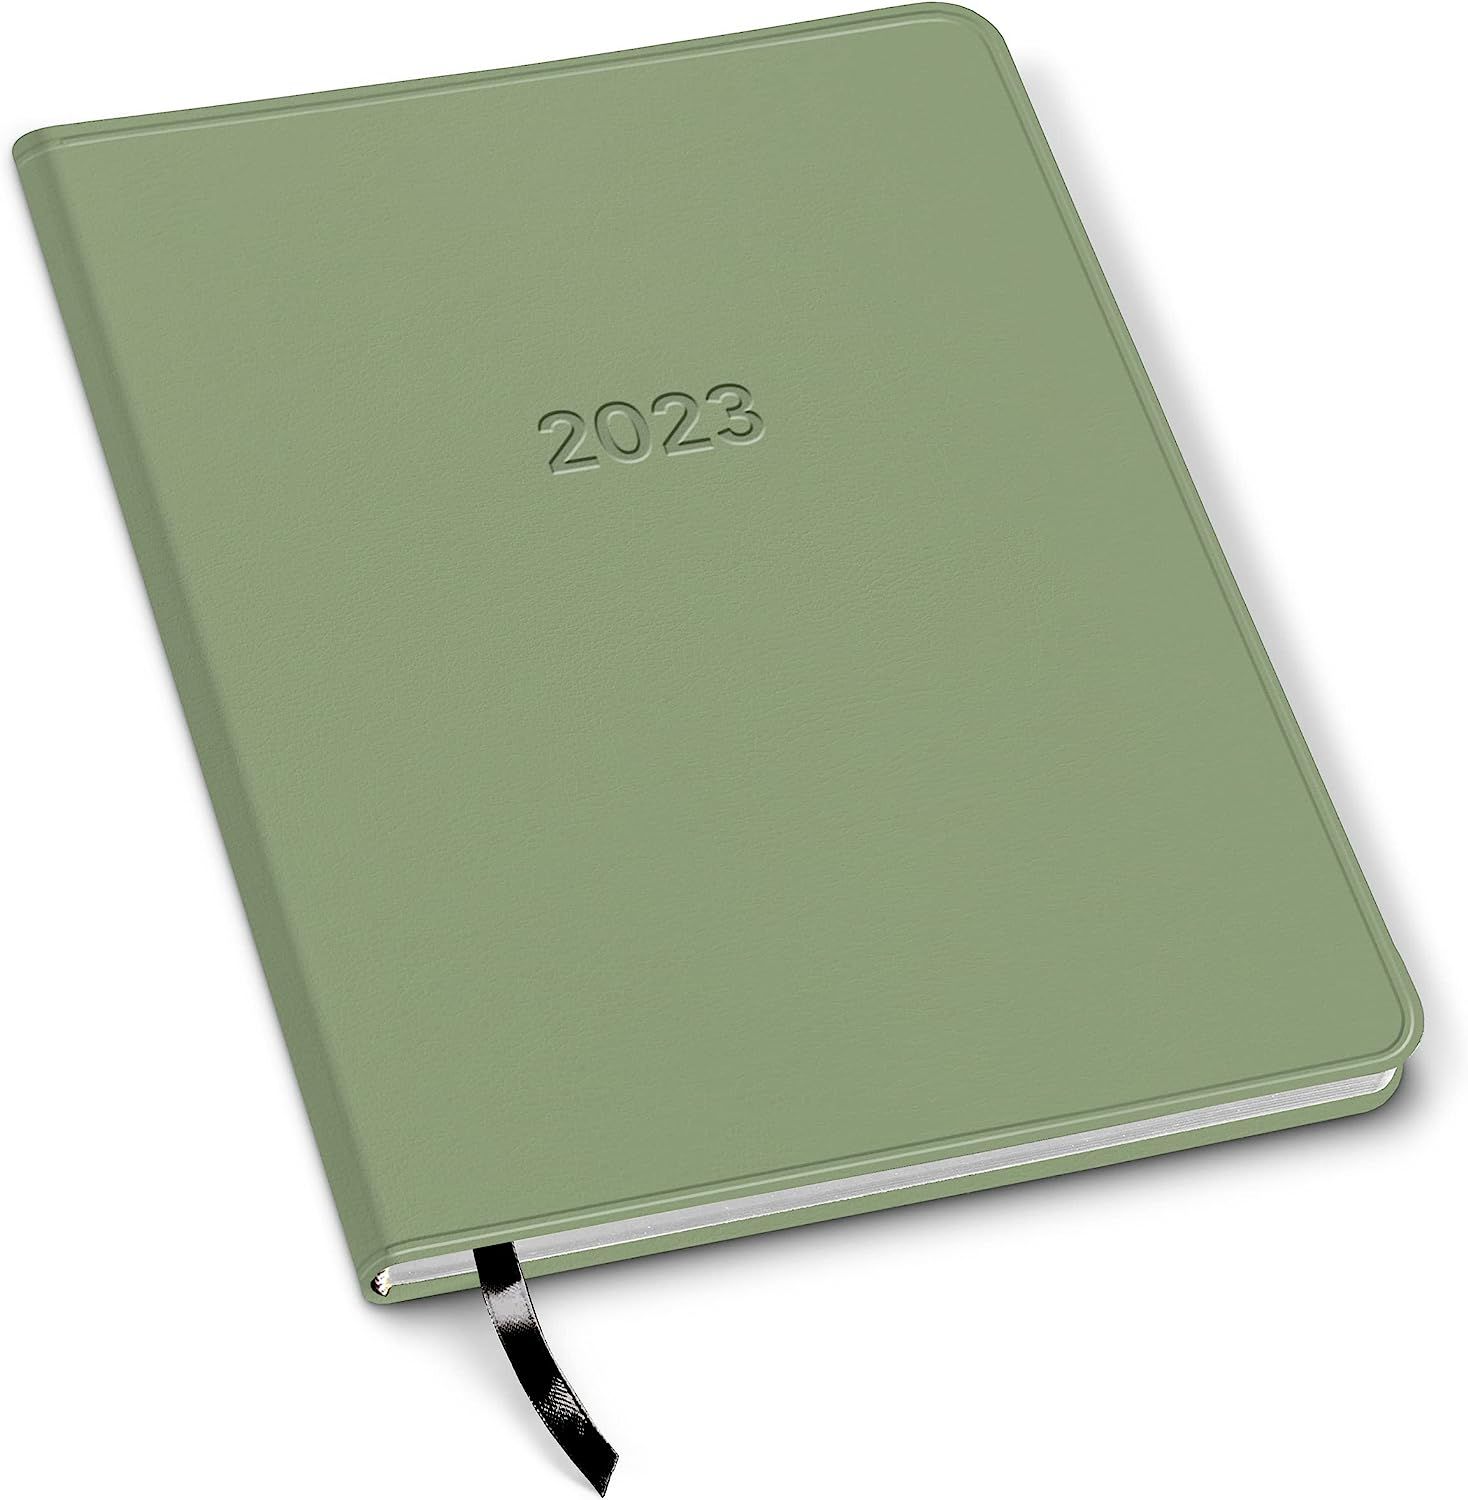 2023 Harbor Large Weekly Planner by Gallery Leather - Cambridge Sage - 9.75x7.5" | Amazon (US)